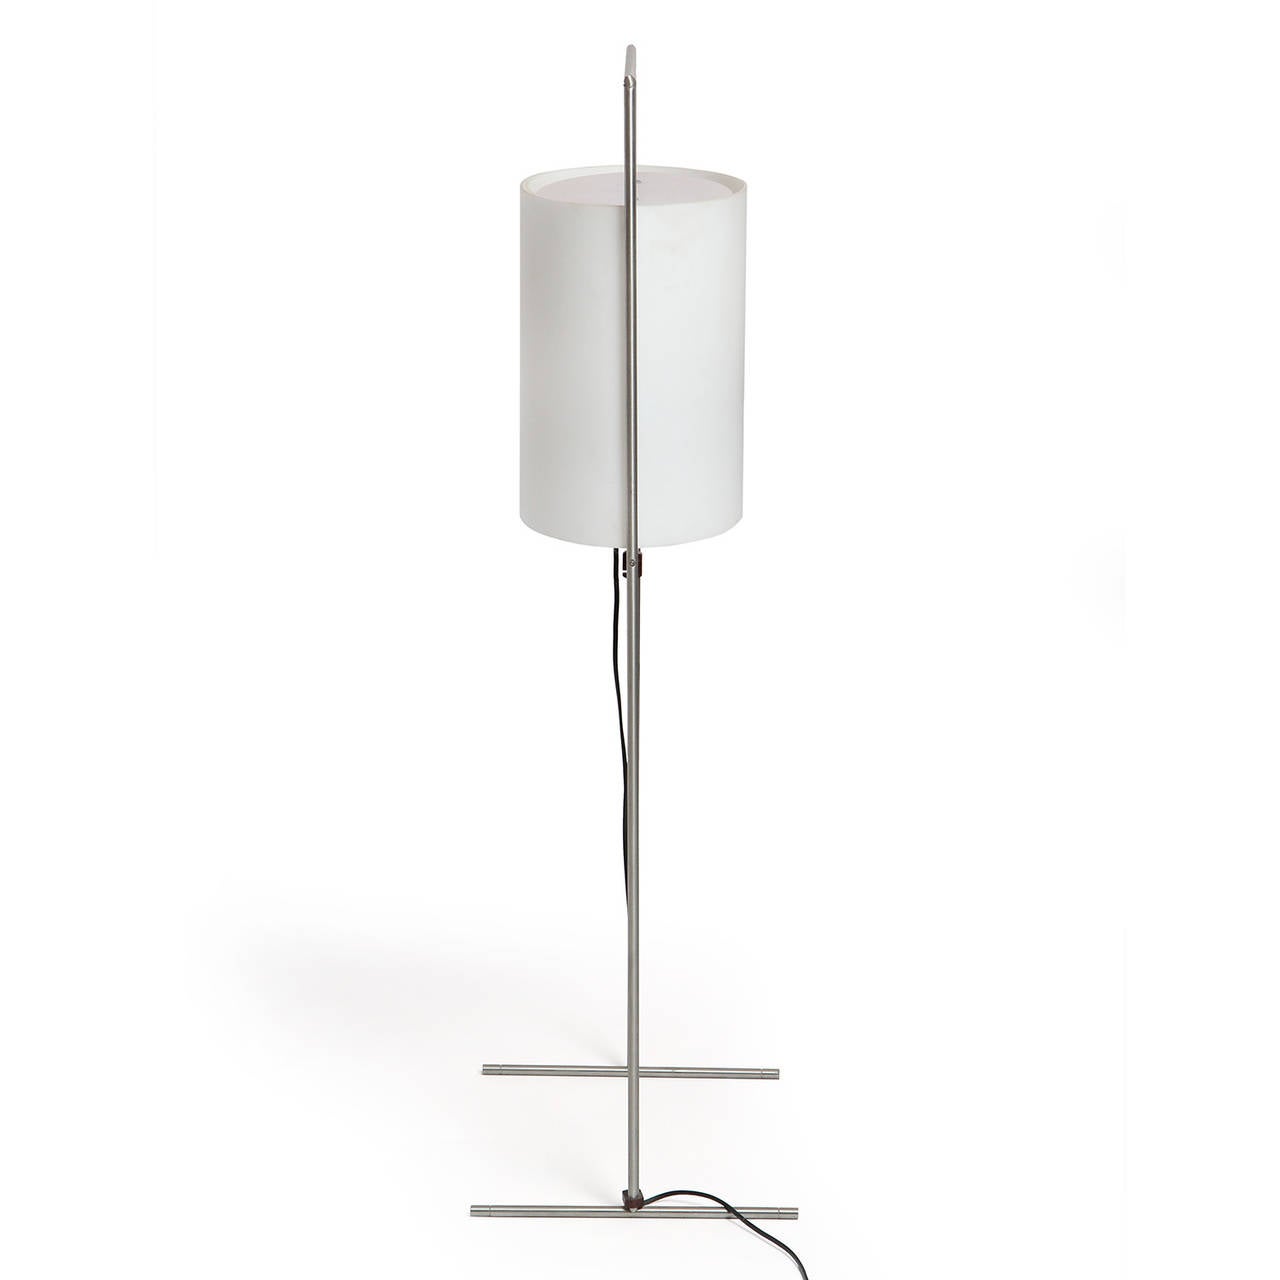 A floor lamp having a spare and linear brushed steel frame with sled feet supporting a suspended elliptical translucent glass shade.